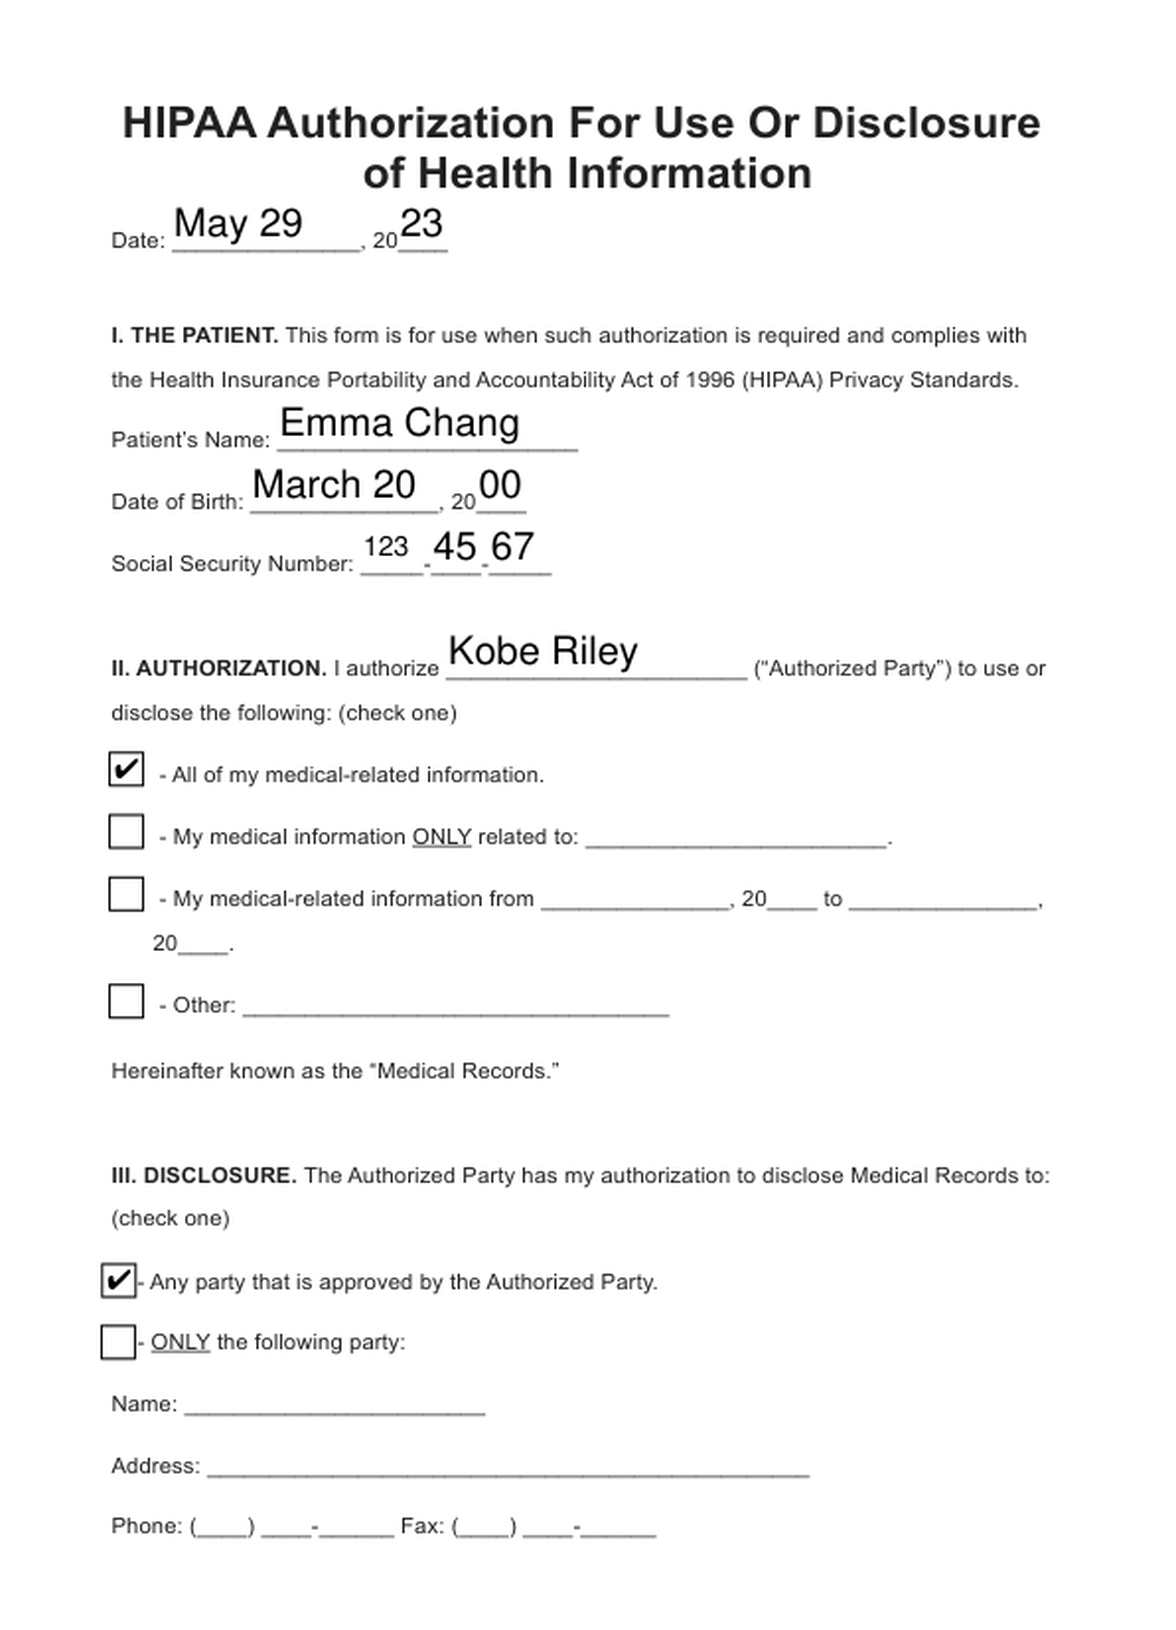 HIPAA Medical Release Form PDF Example